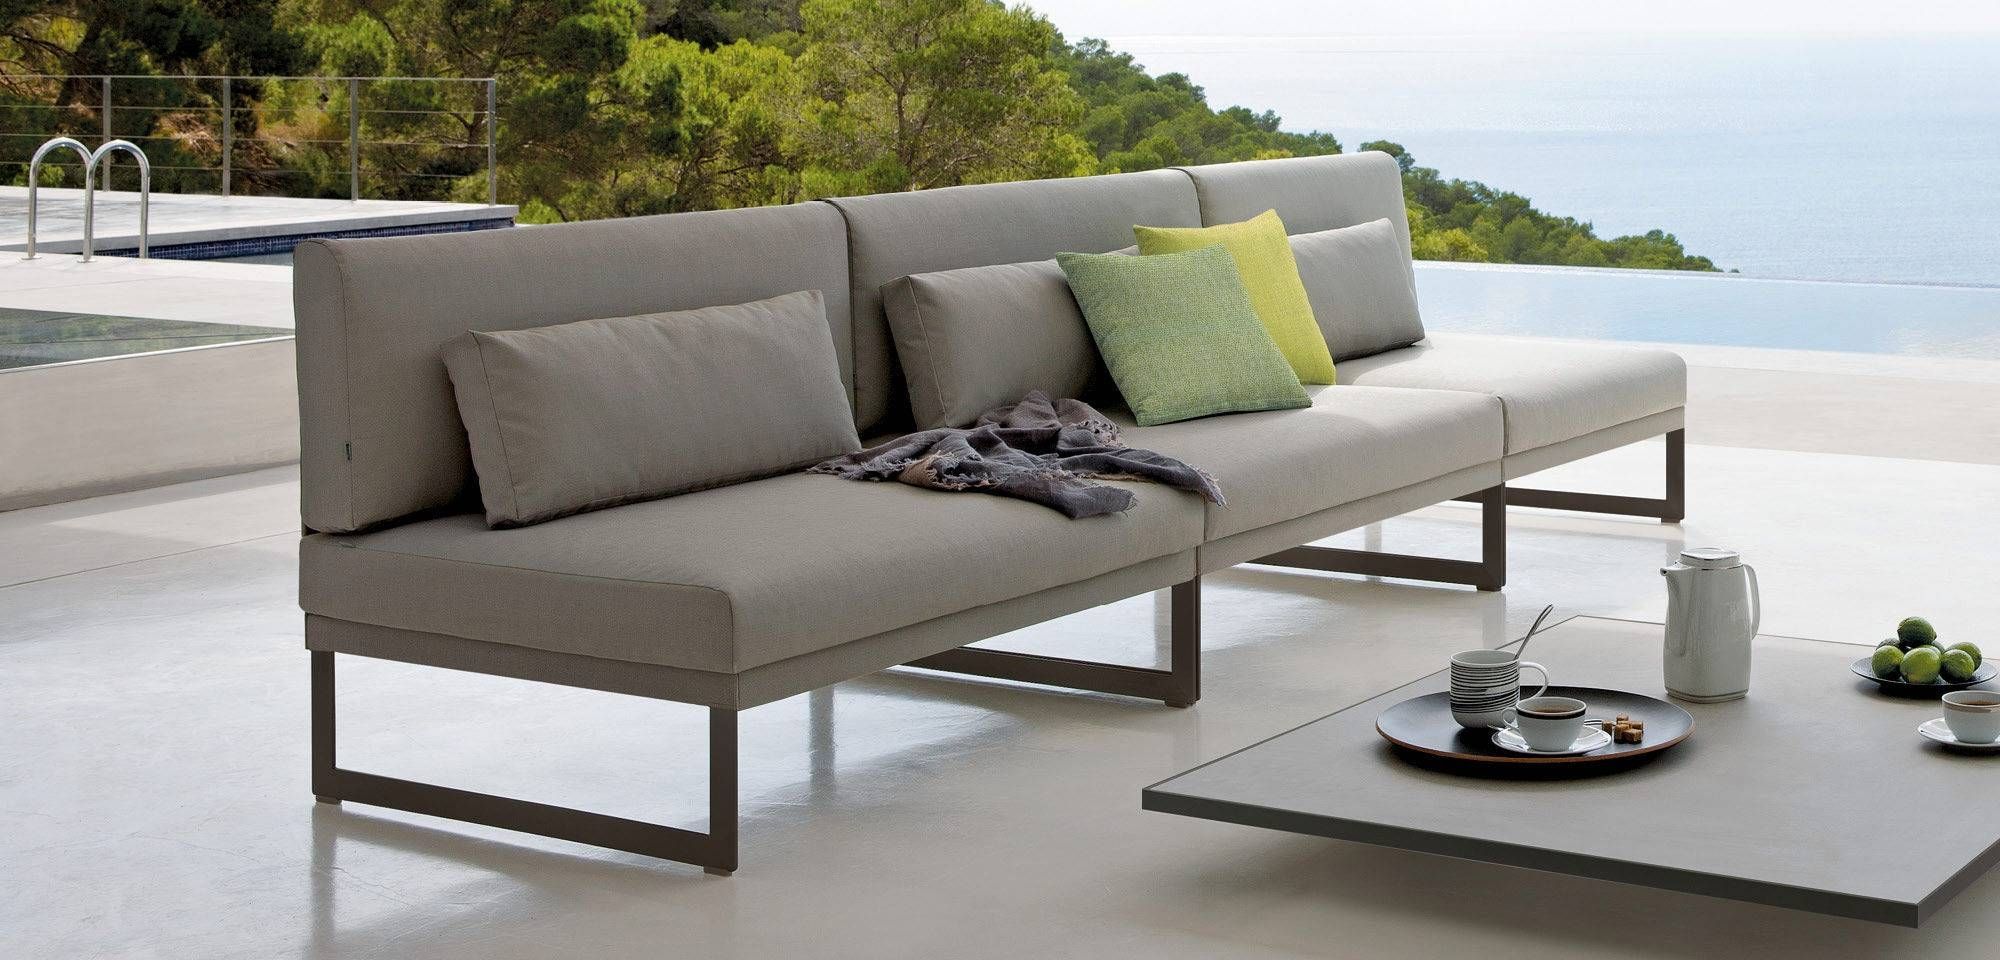 Contemporary Coffee Table / Glass / Aluminum / Hpl – Luna – Manutti With Regard To Luna Coffee Tables (View 30 of 30)